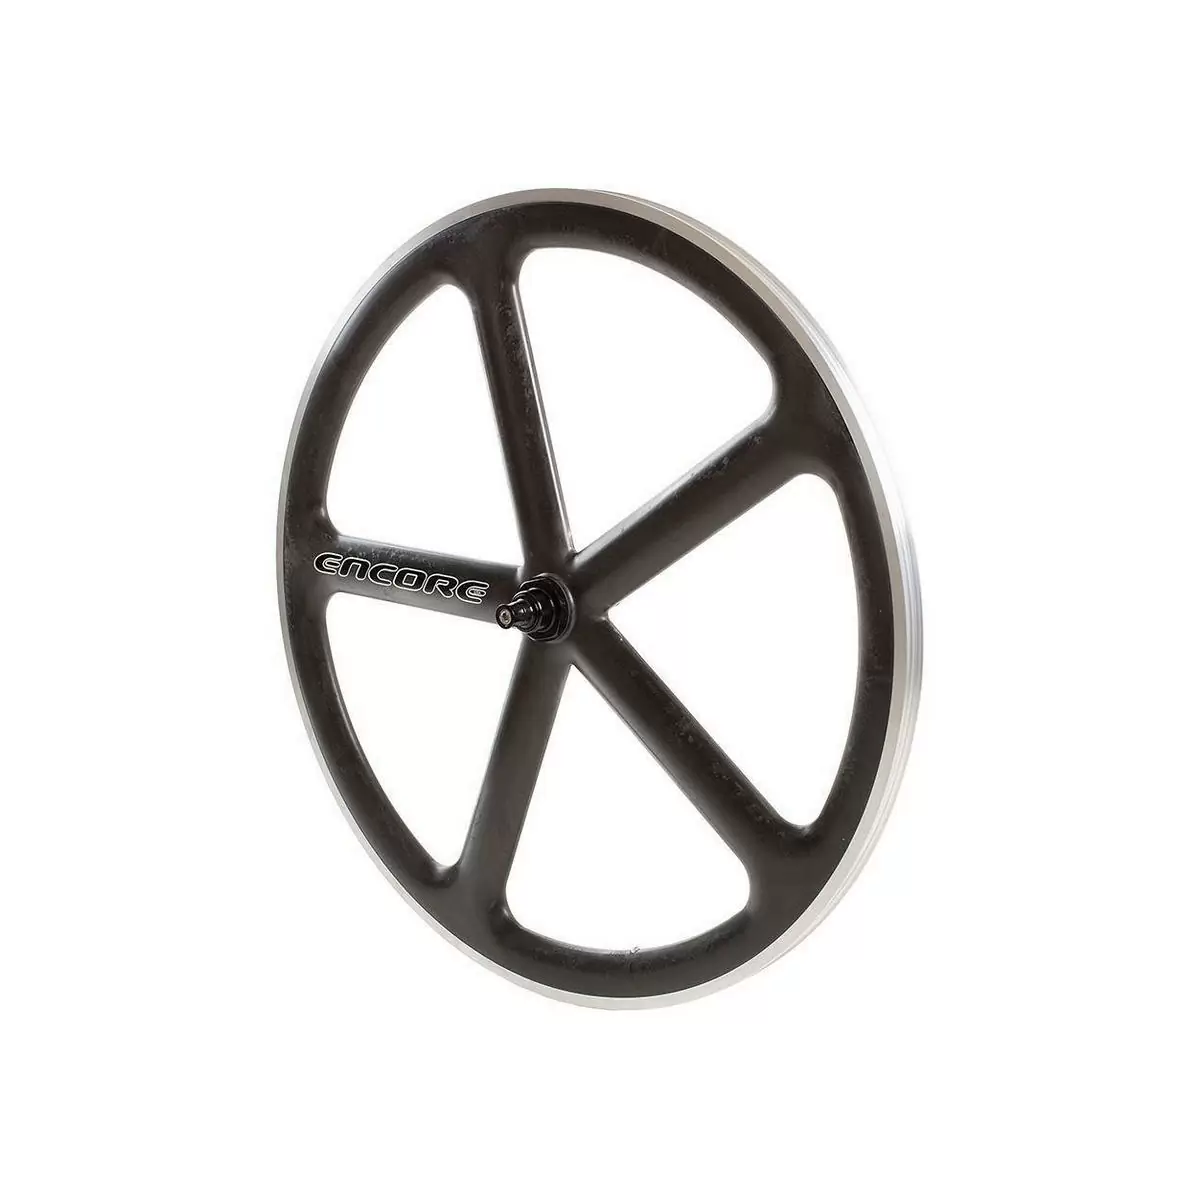 rear wheel 700c track 5 spokes carbon weave natural msw #1